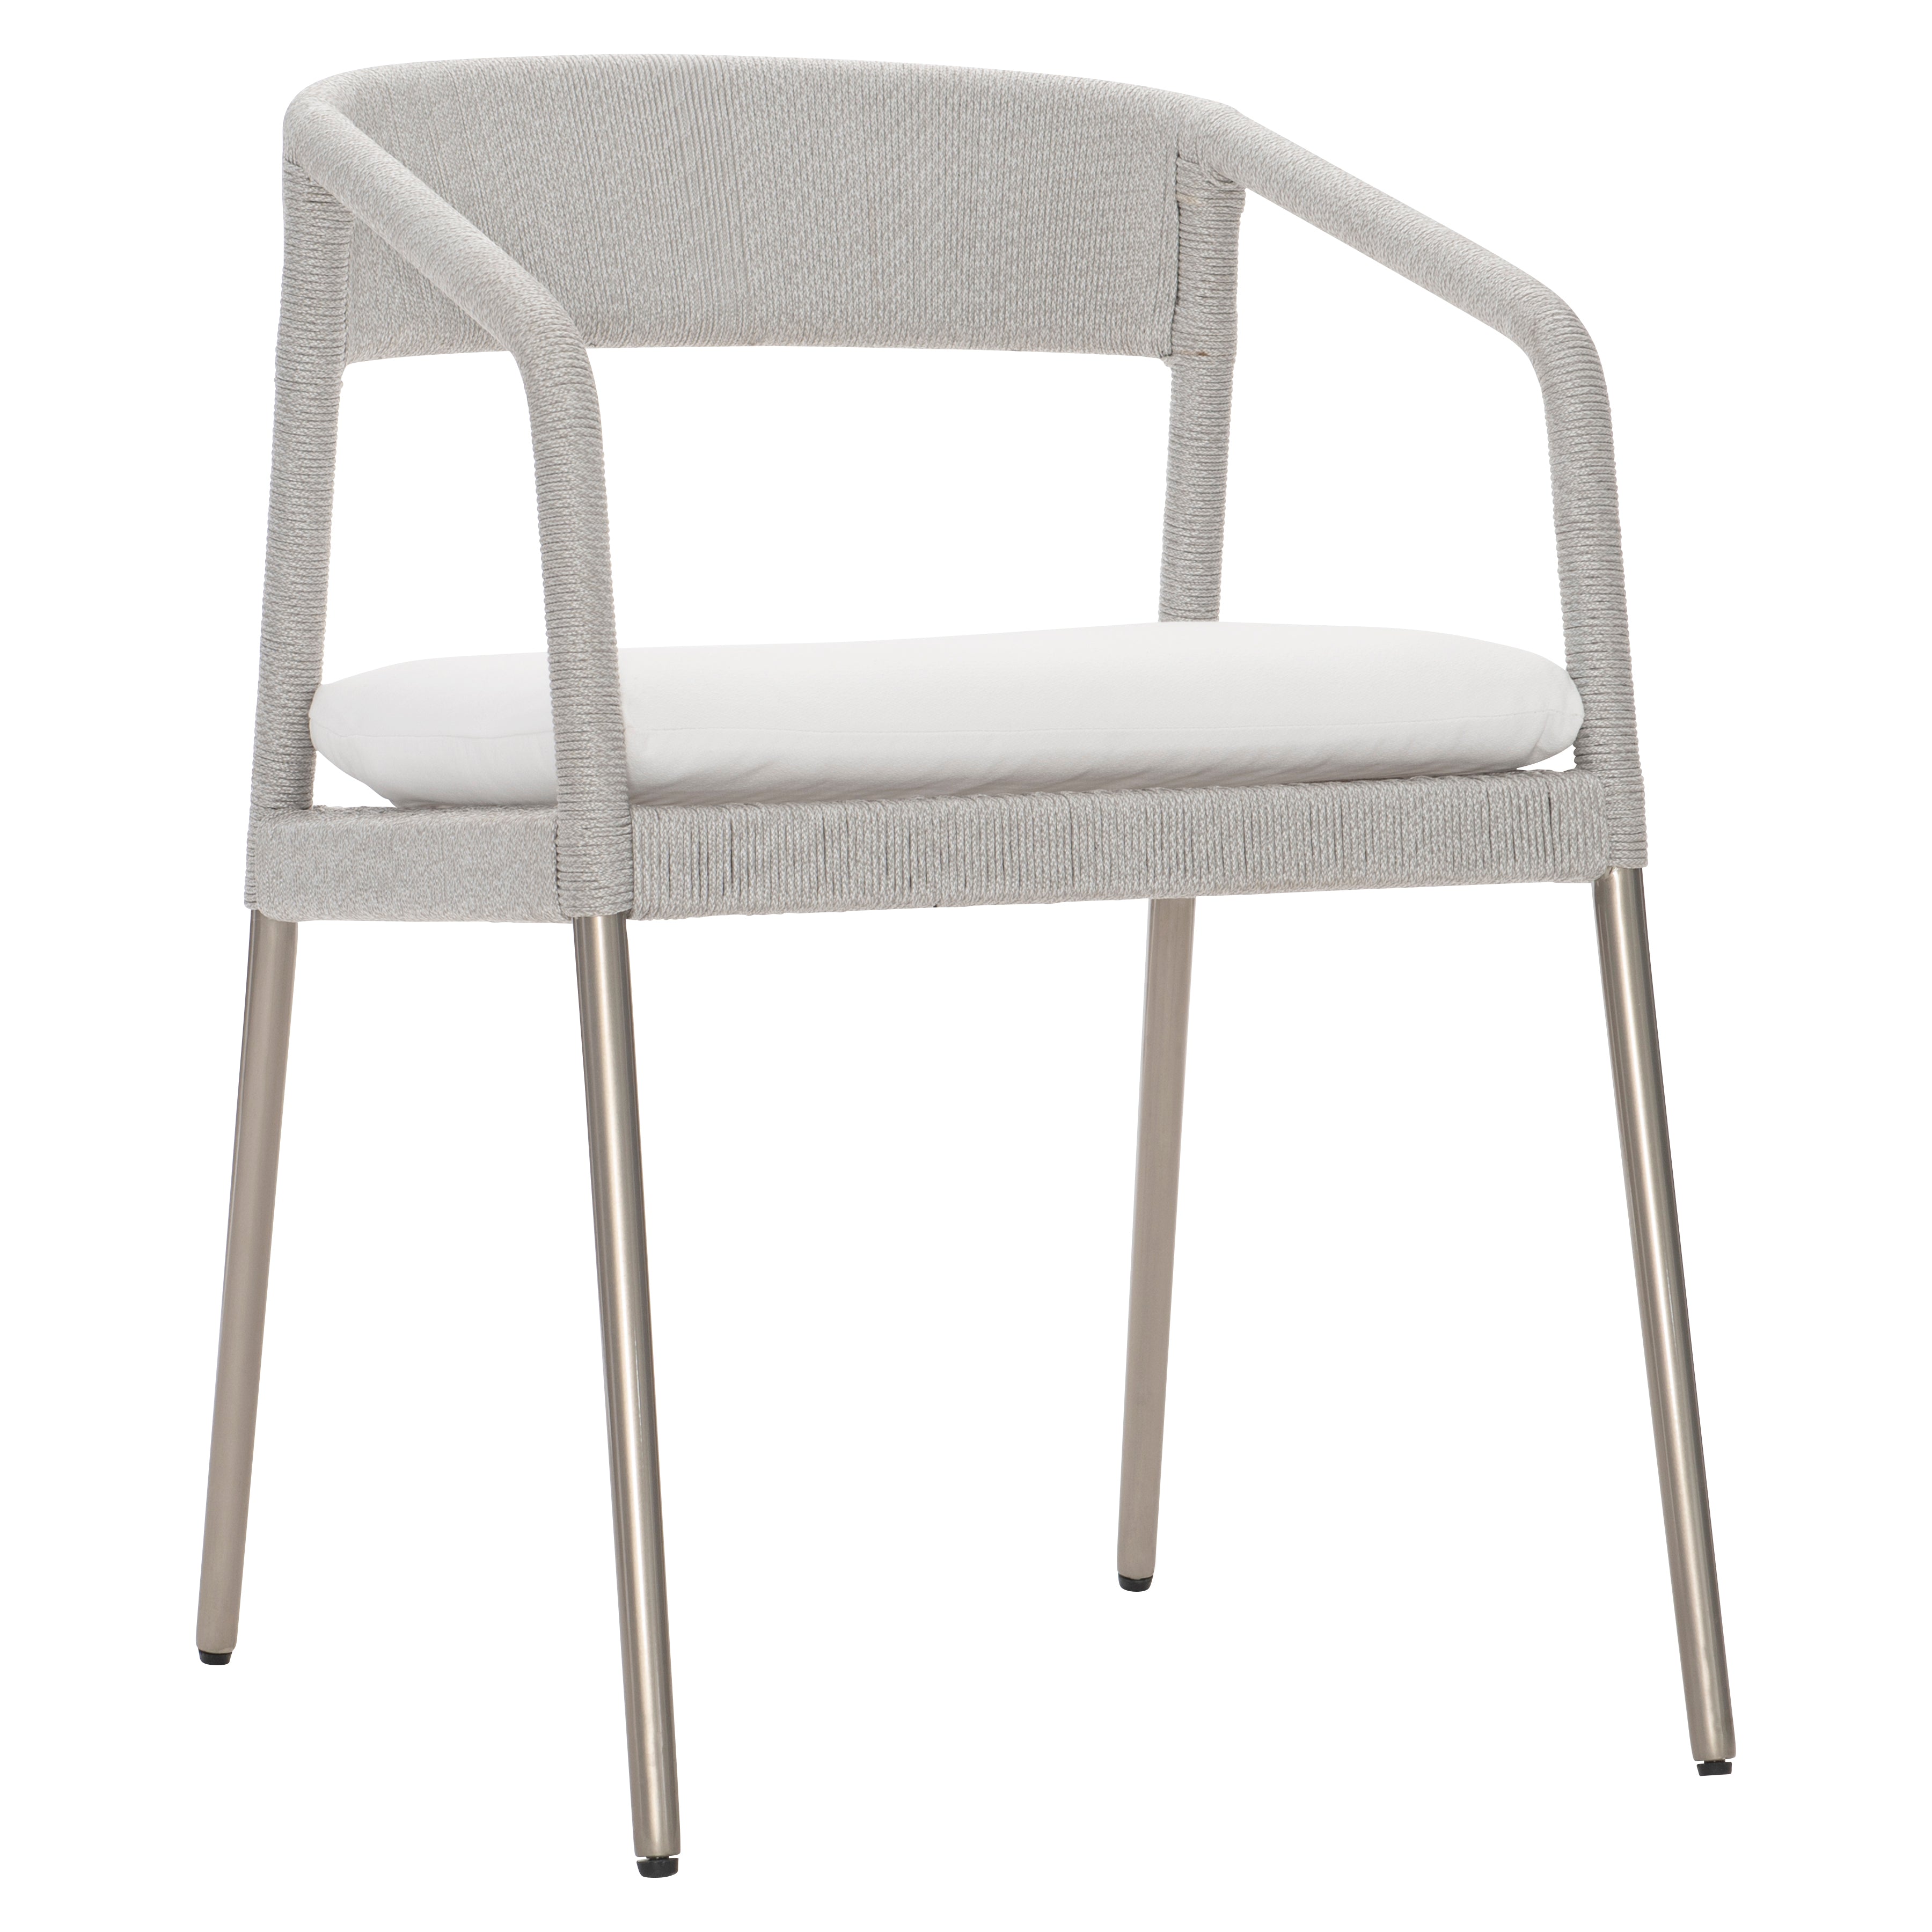 Caribe Outdoor Arm Chair with Seat Pad